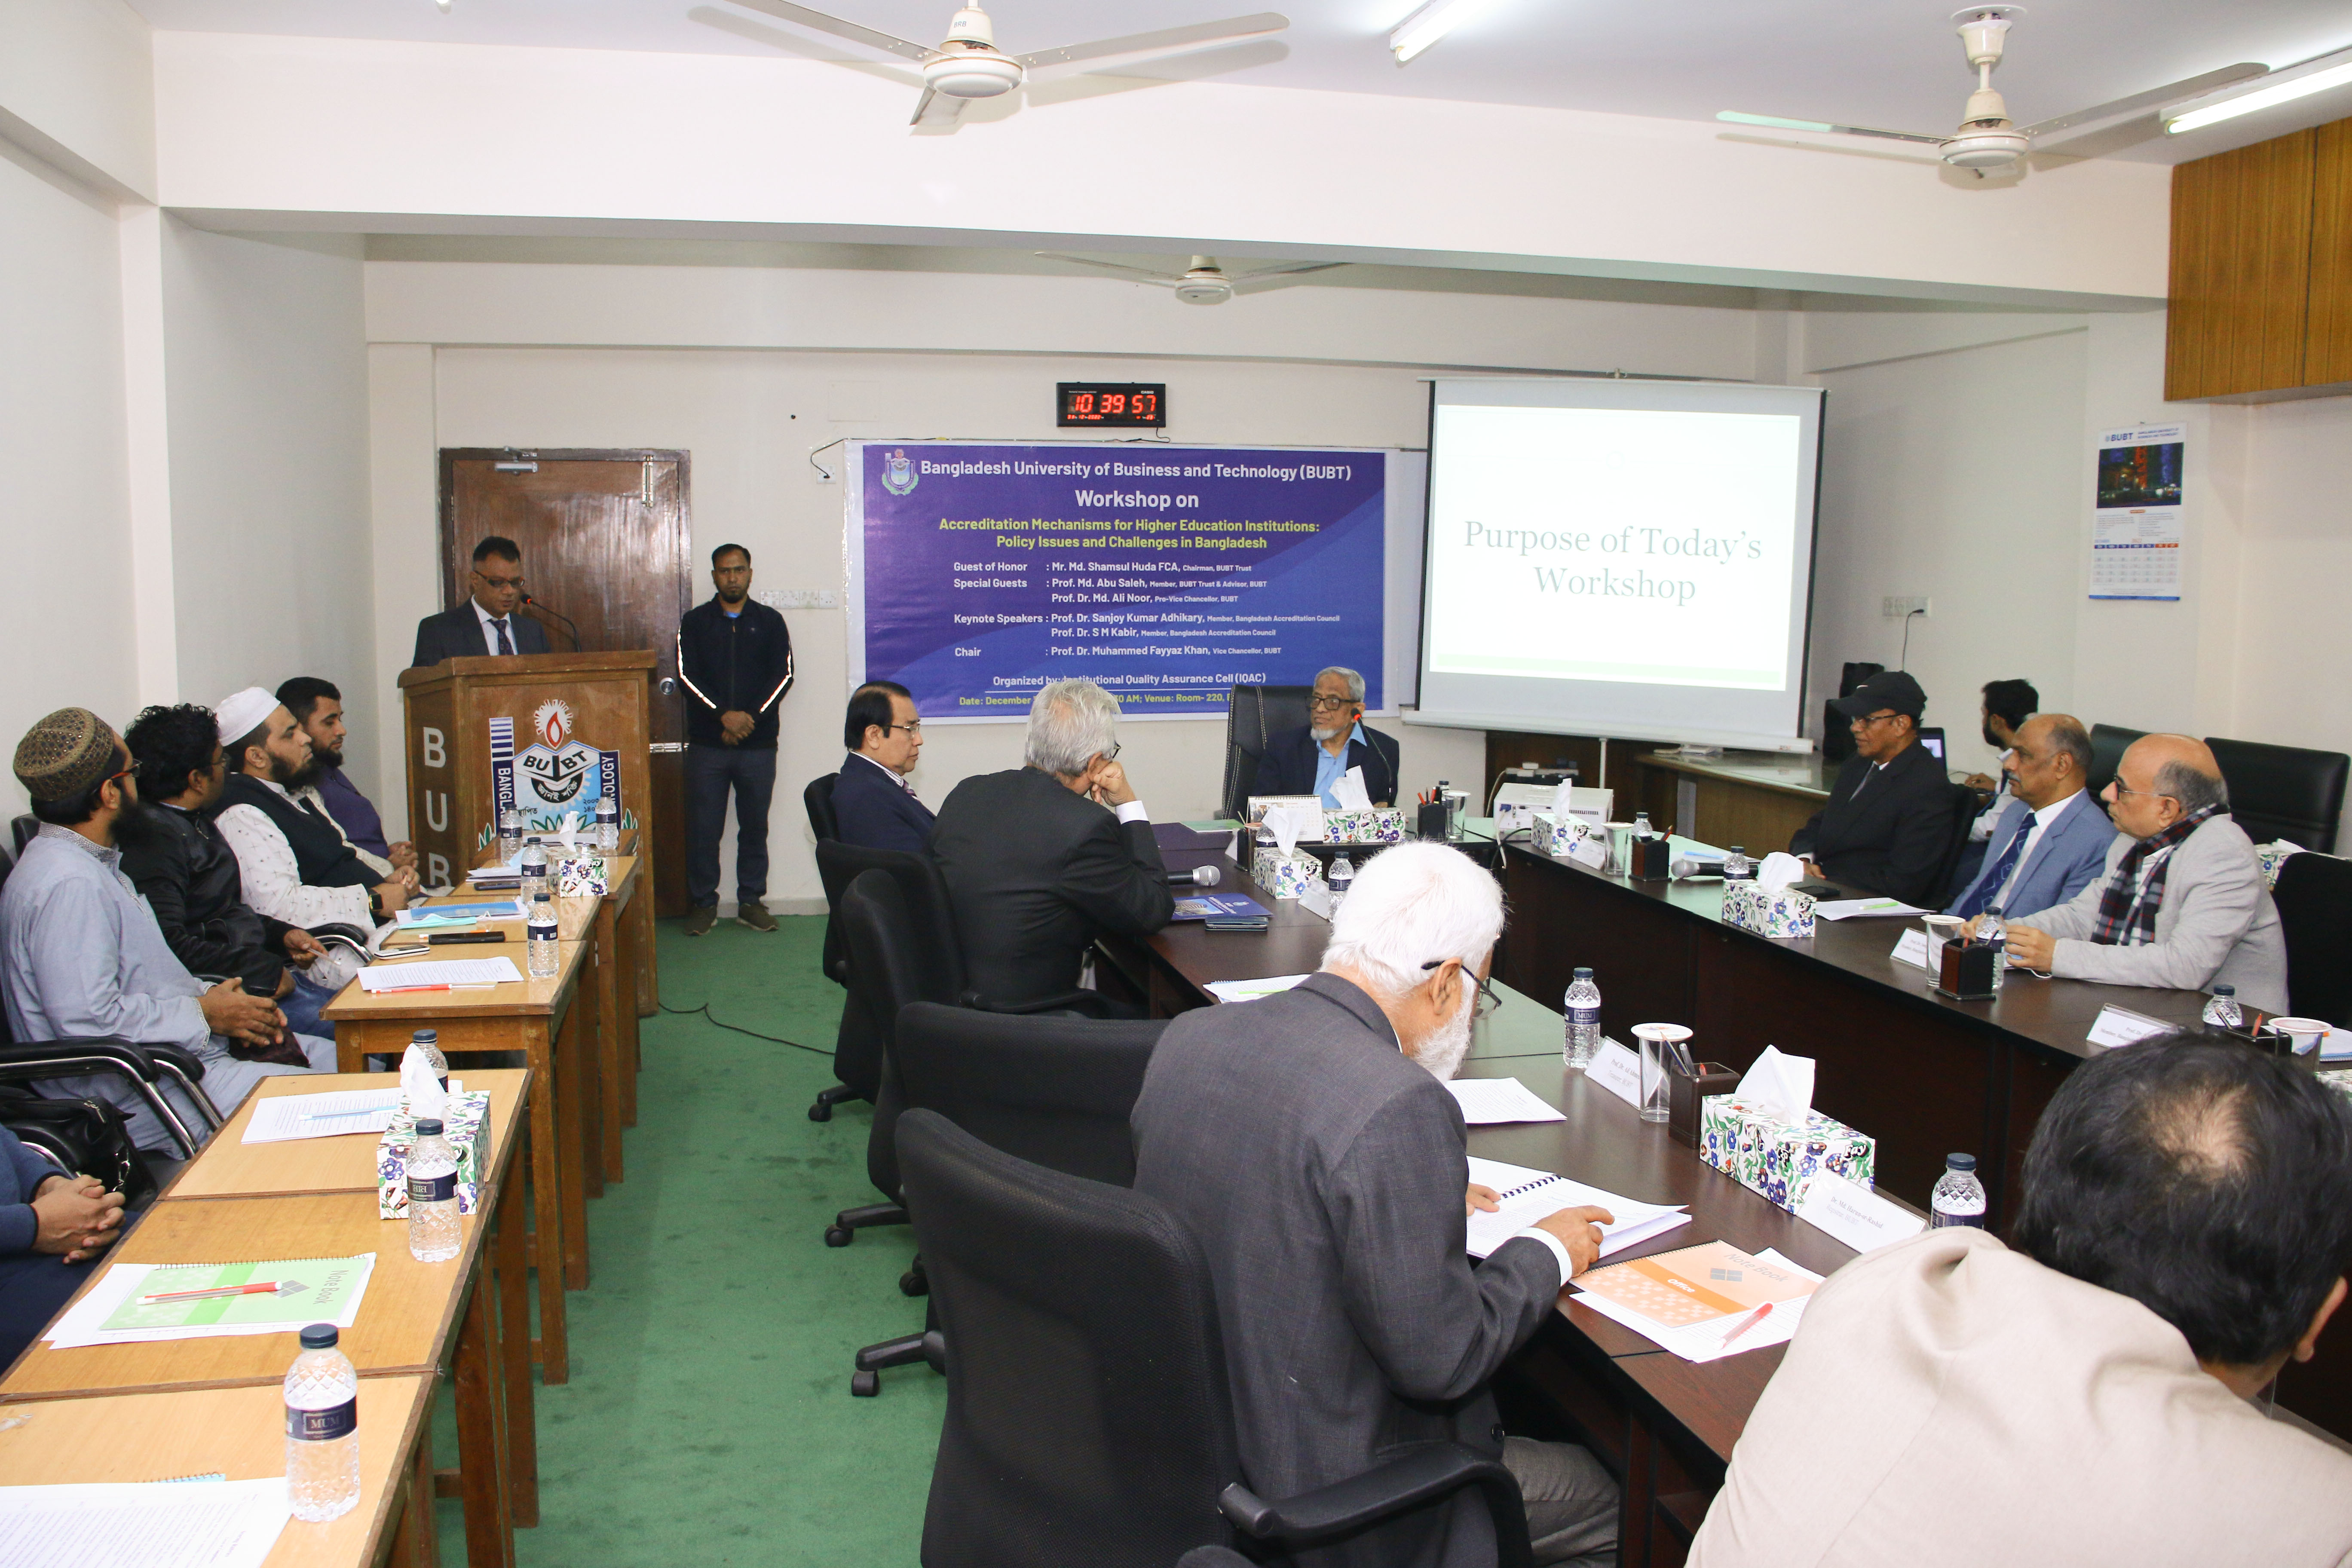 Workshop on “Accreditation Mechanisms of Higher Education Institutions: Policy Issues and Challenges in Bangladesh”